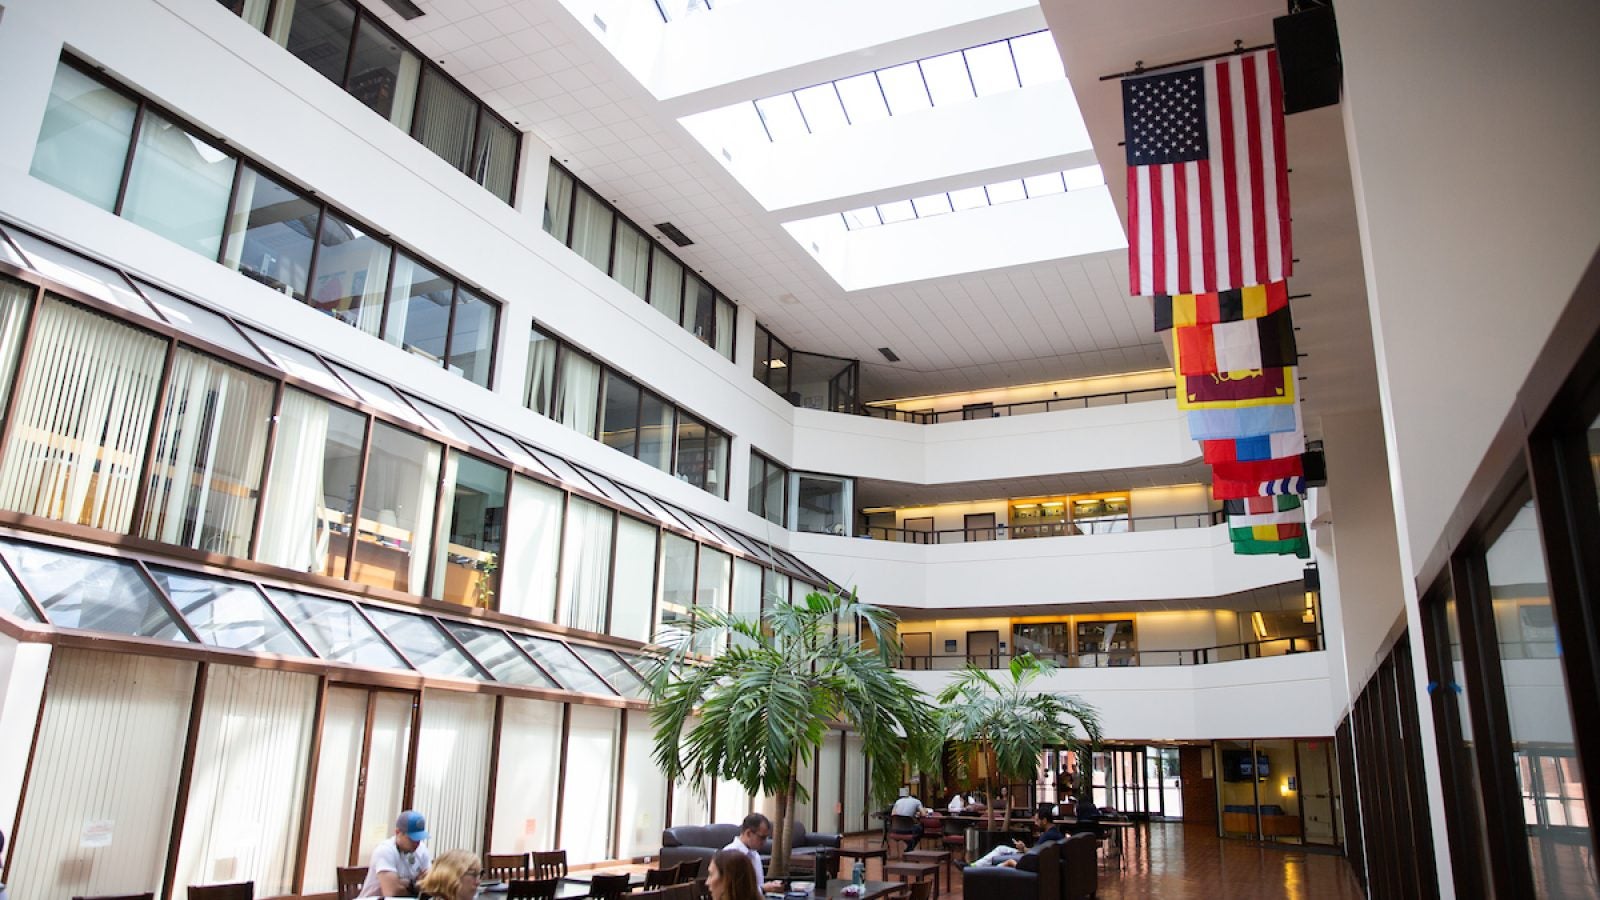 Intercultural Center building interior with skylight and various countries flags